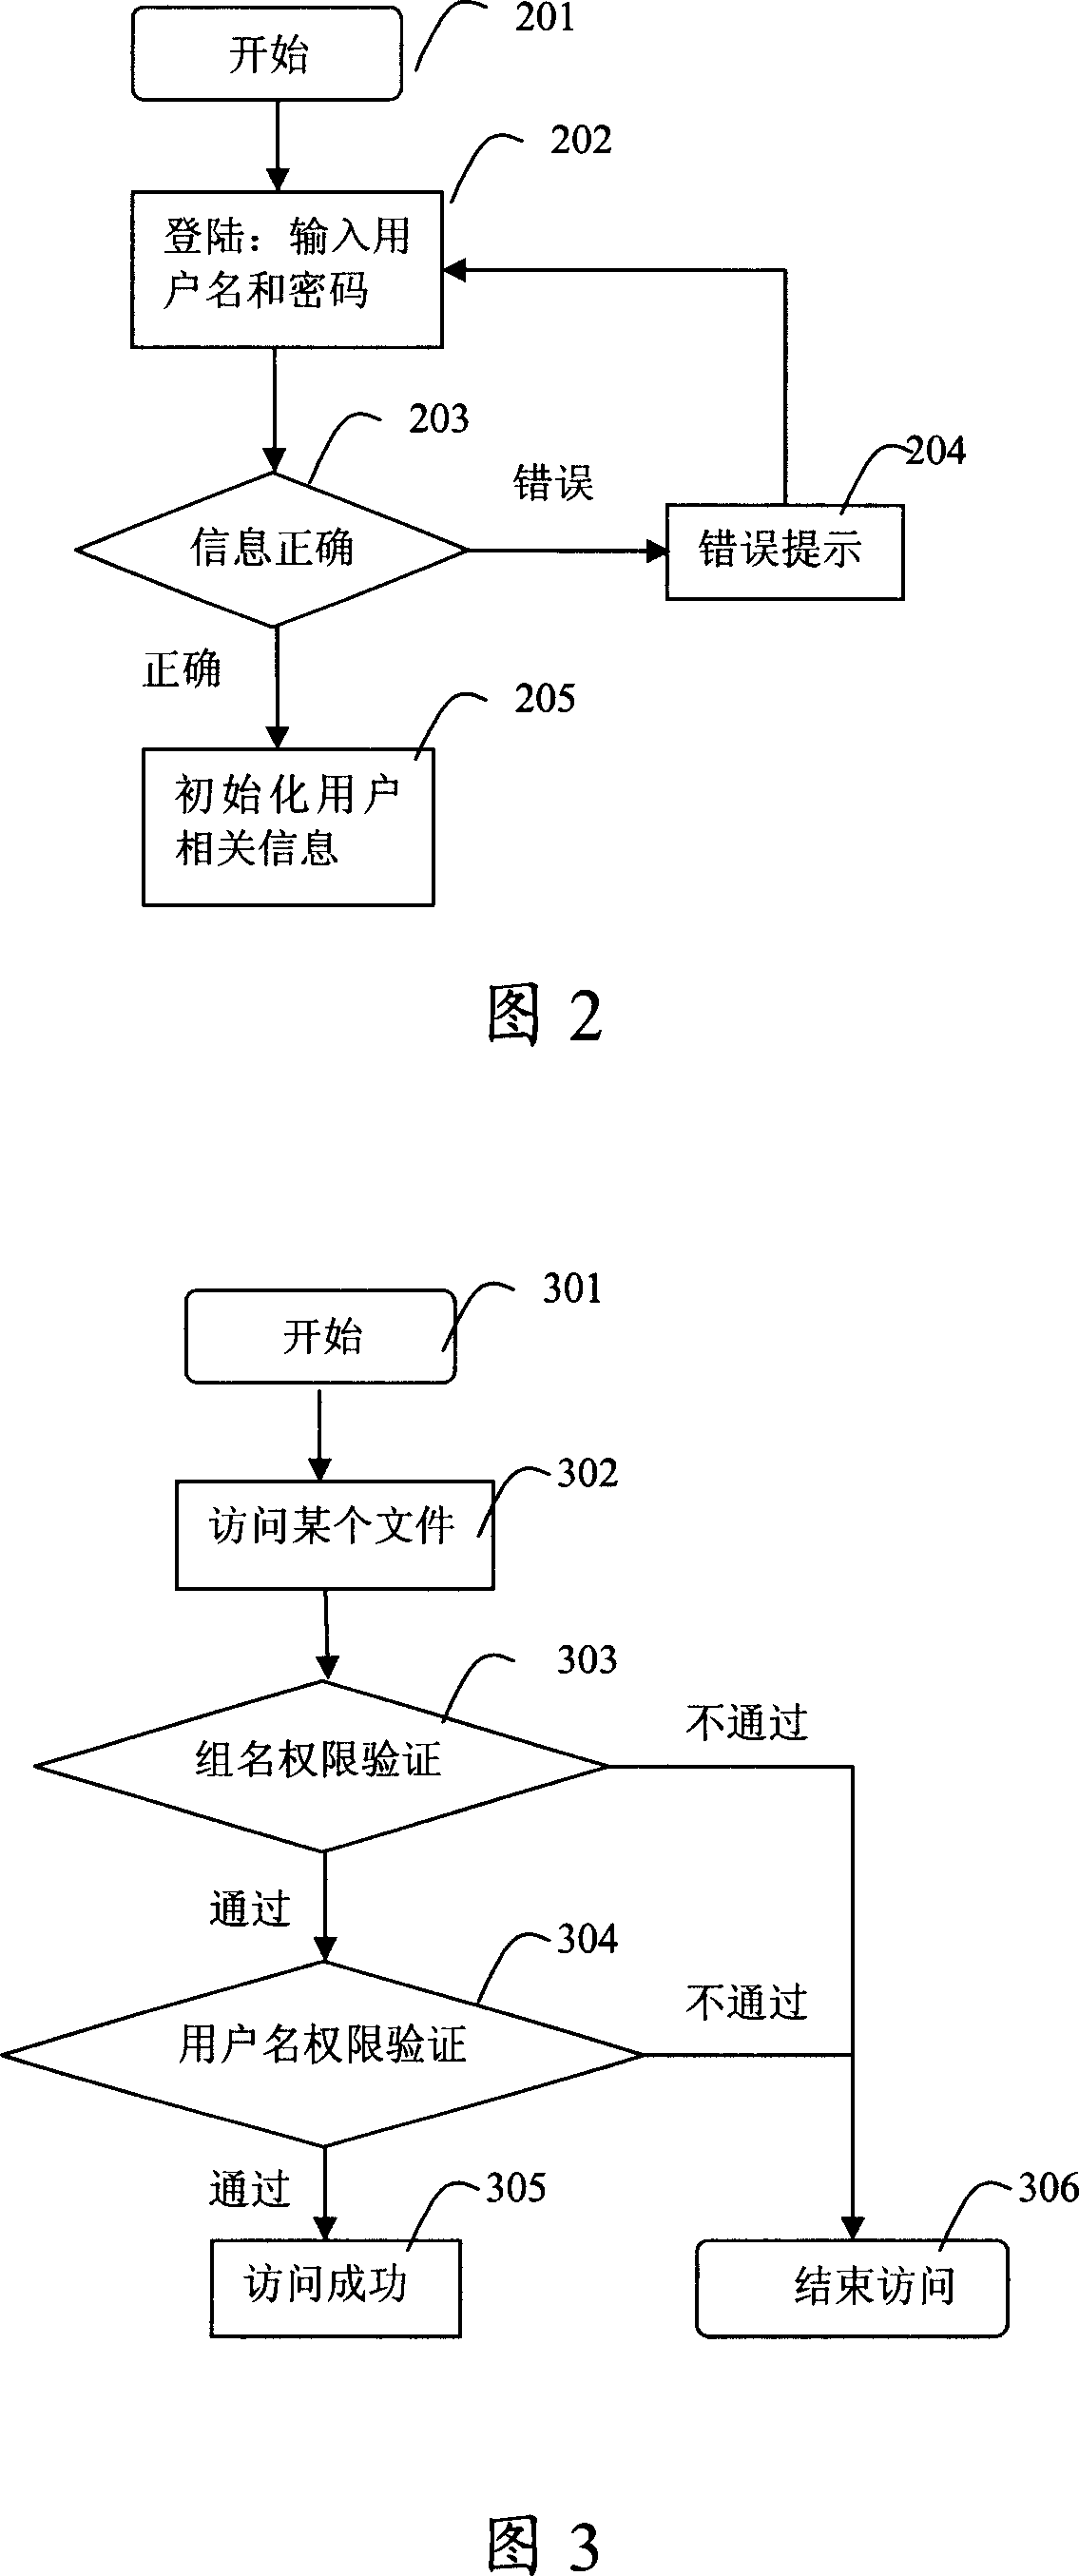 Method and device for managing multi-users of mobile terminal